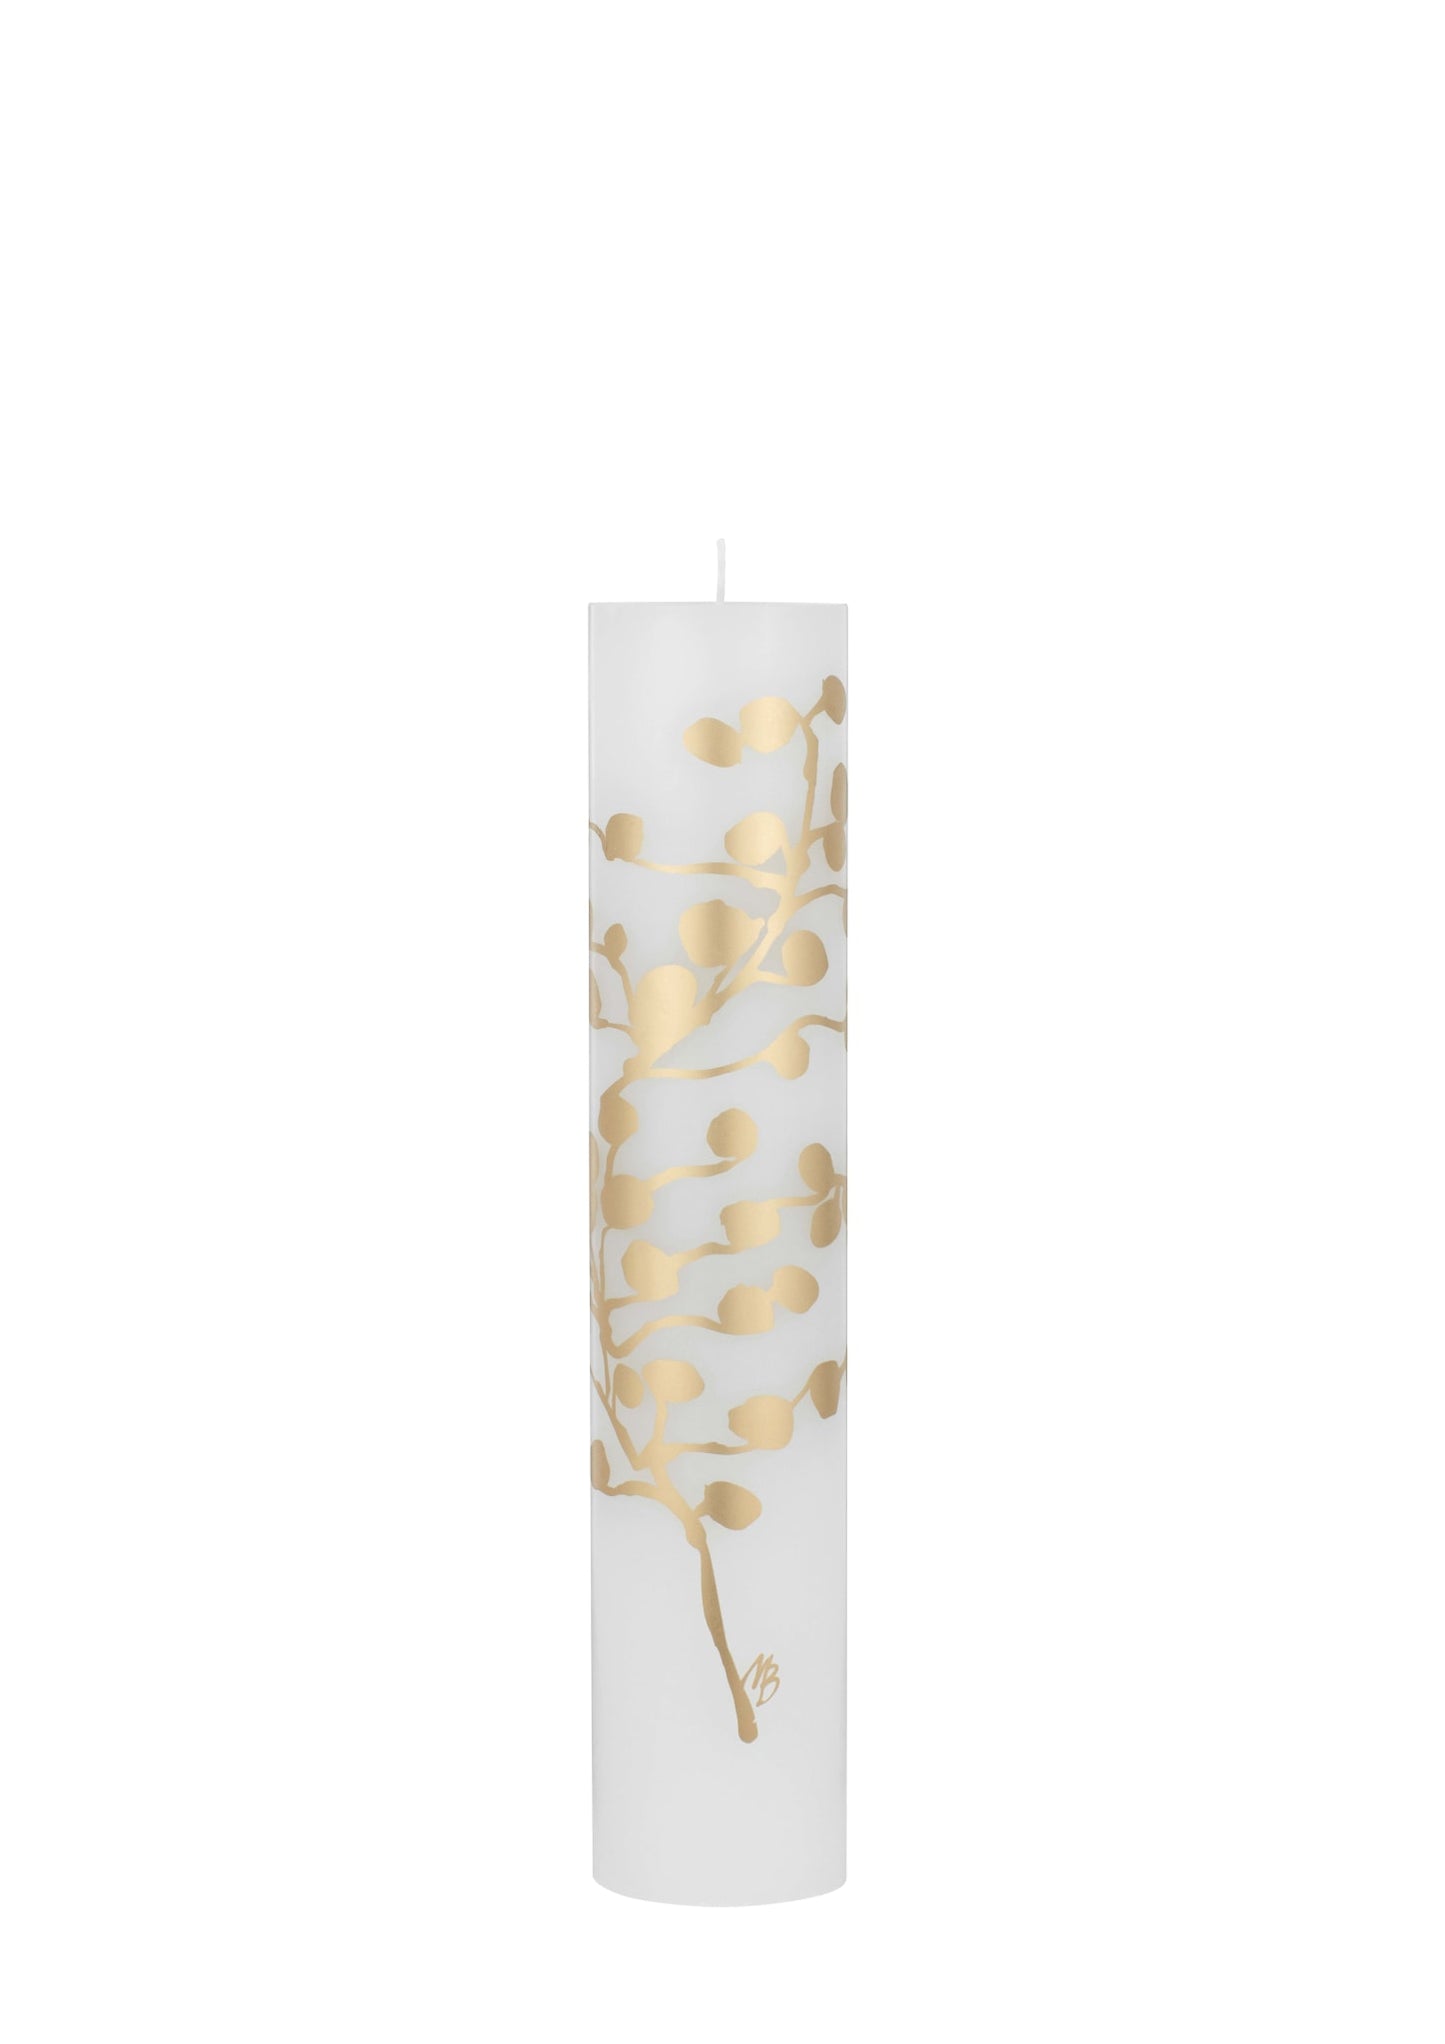 Abstract Flowers - Wild Flowers - Wax Alter Candles 6 cm x 30 cm - Gold